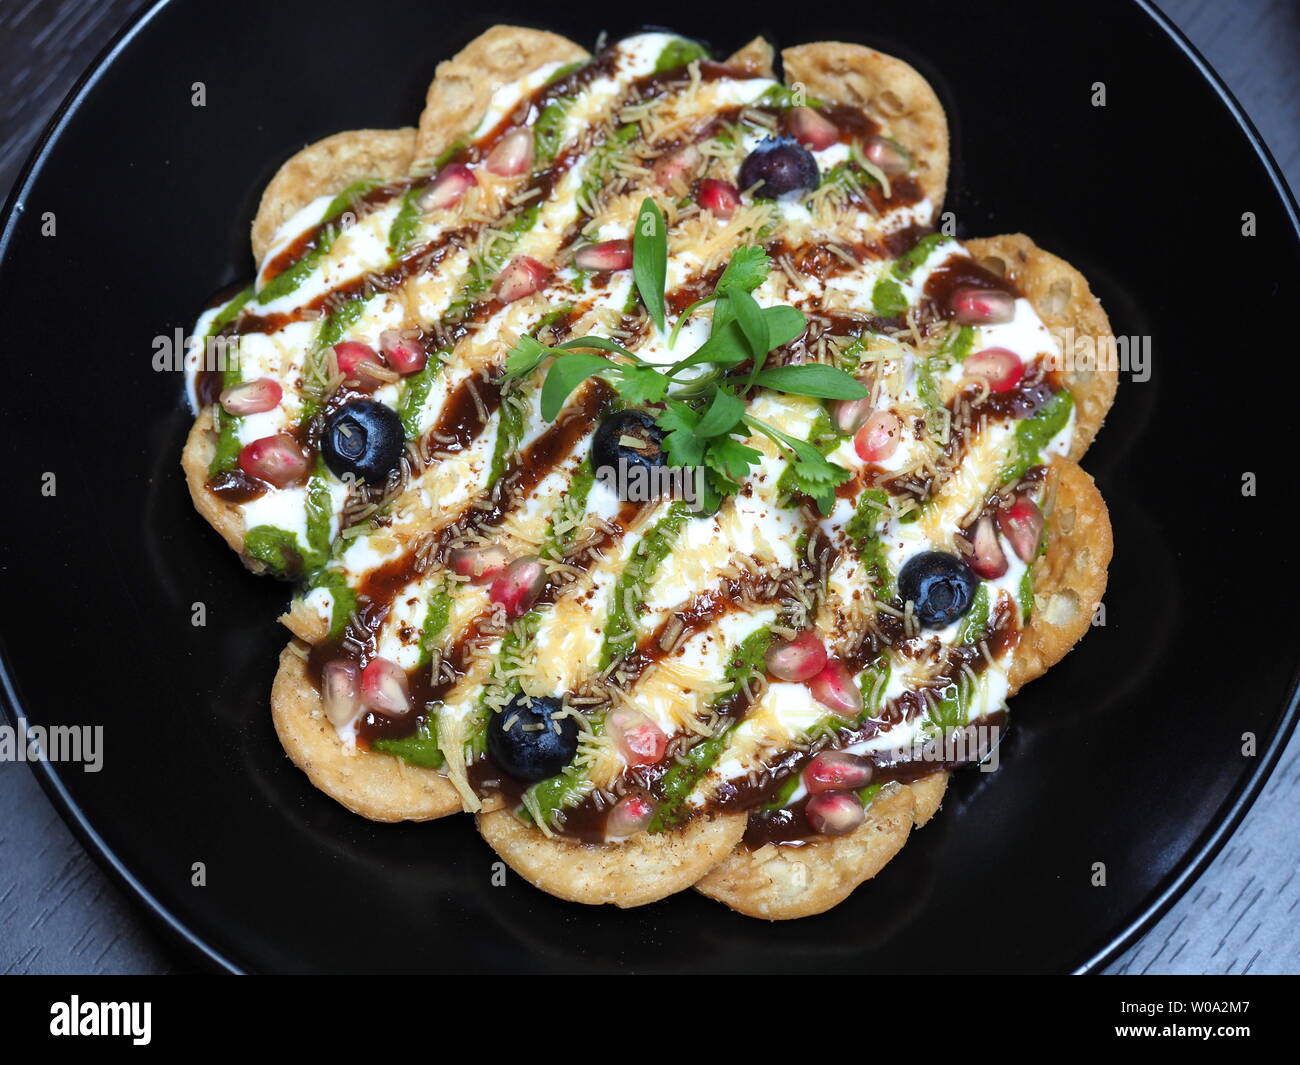 June 2019 - Top Down View Of A Plate Of Chaat From A Michelin Starred Indian Restaurant Stock Photo